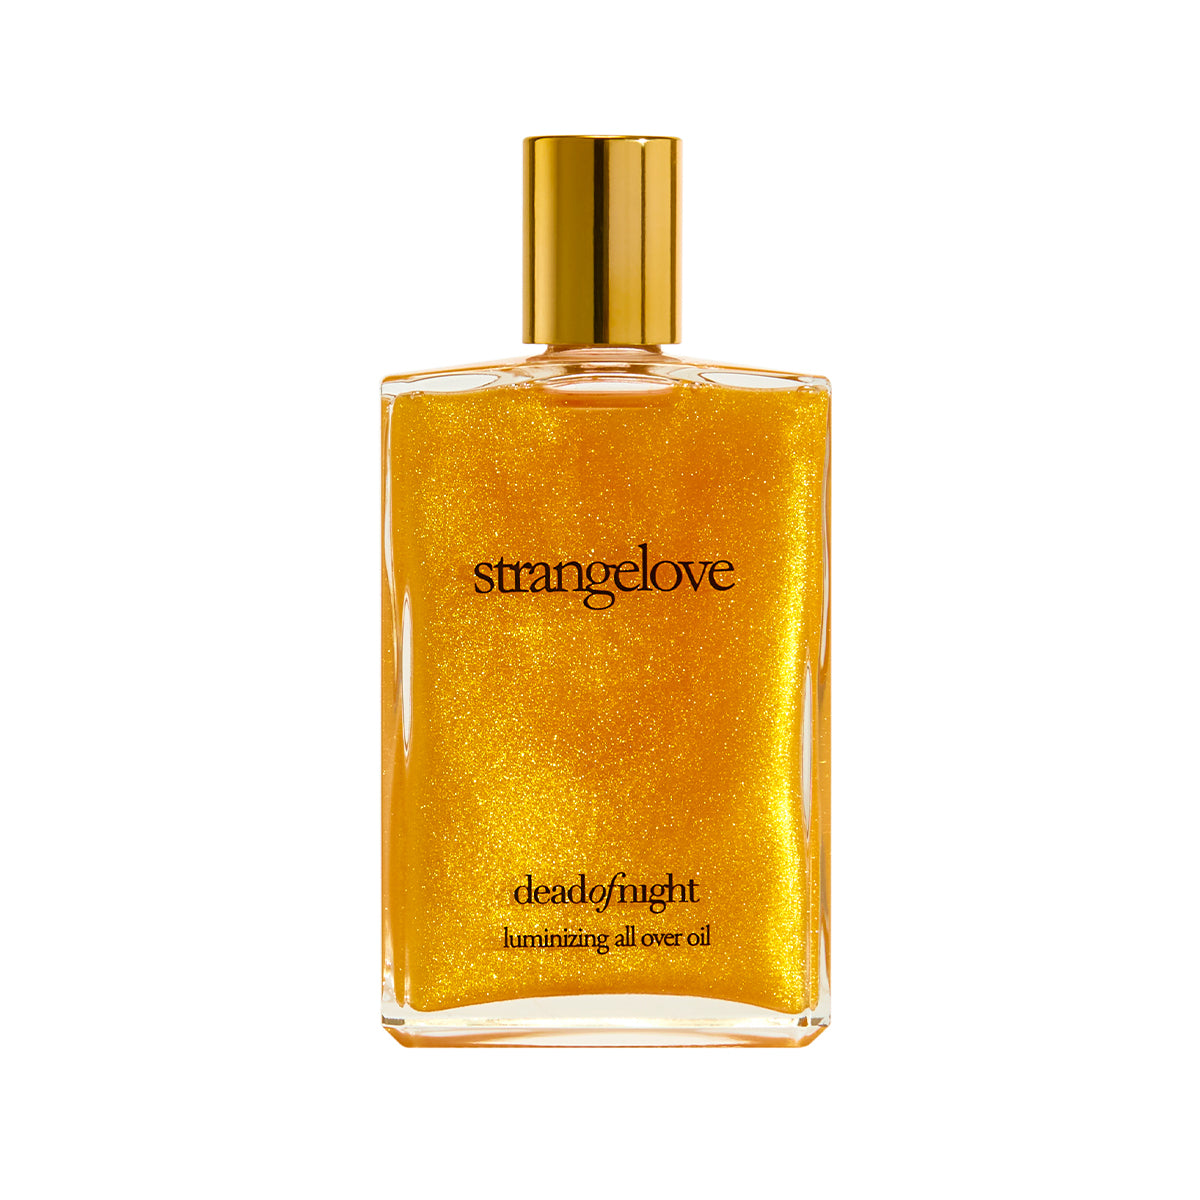 Dead of Night (Luminizing All Over Oil) - Strangelove NYC - Aceite corporal 100ml